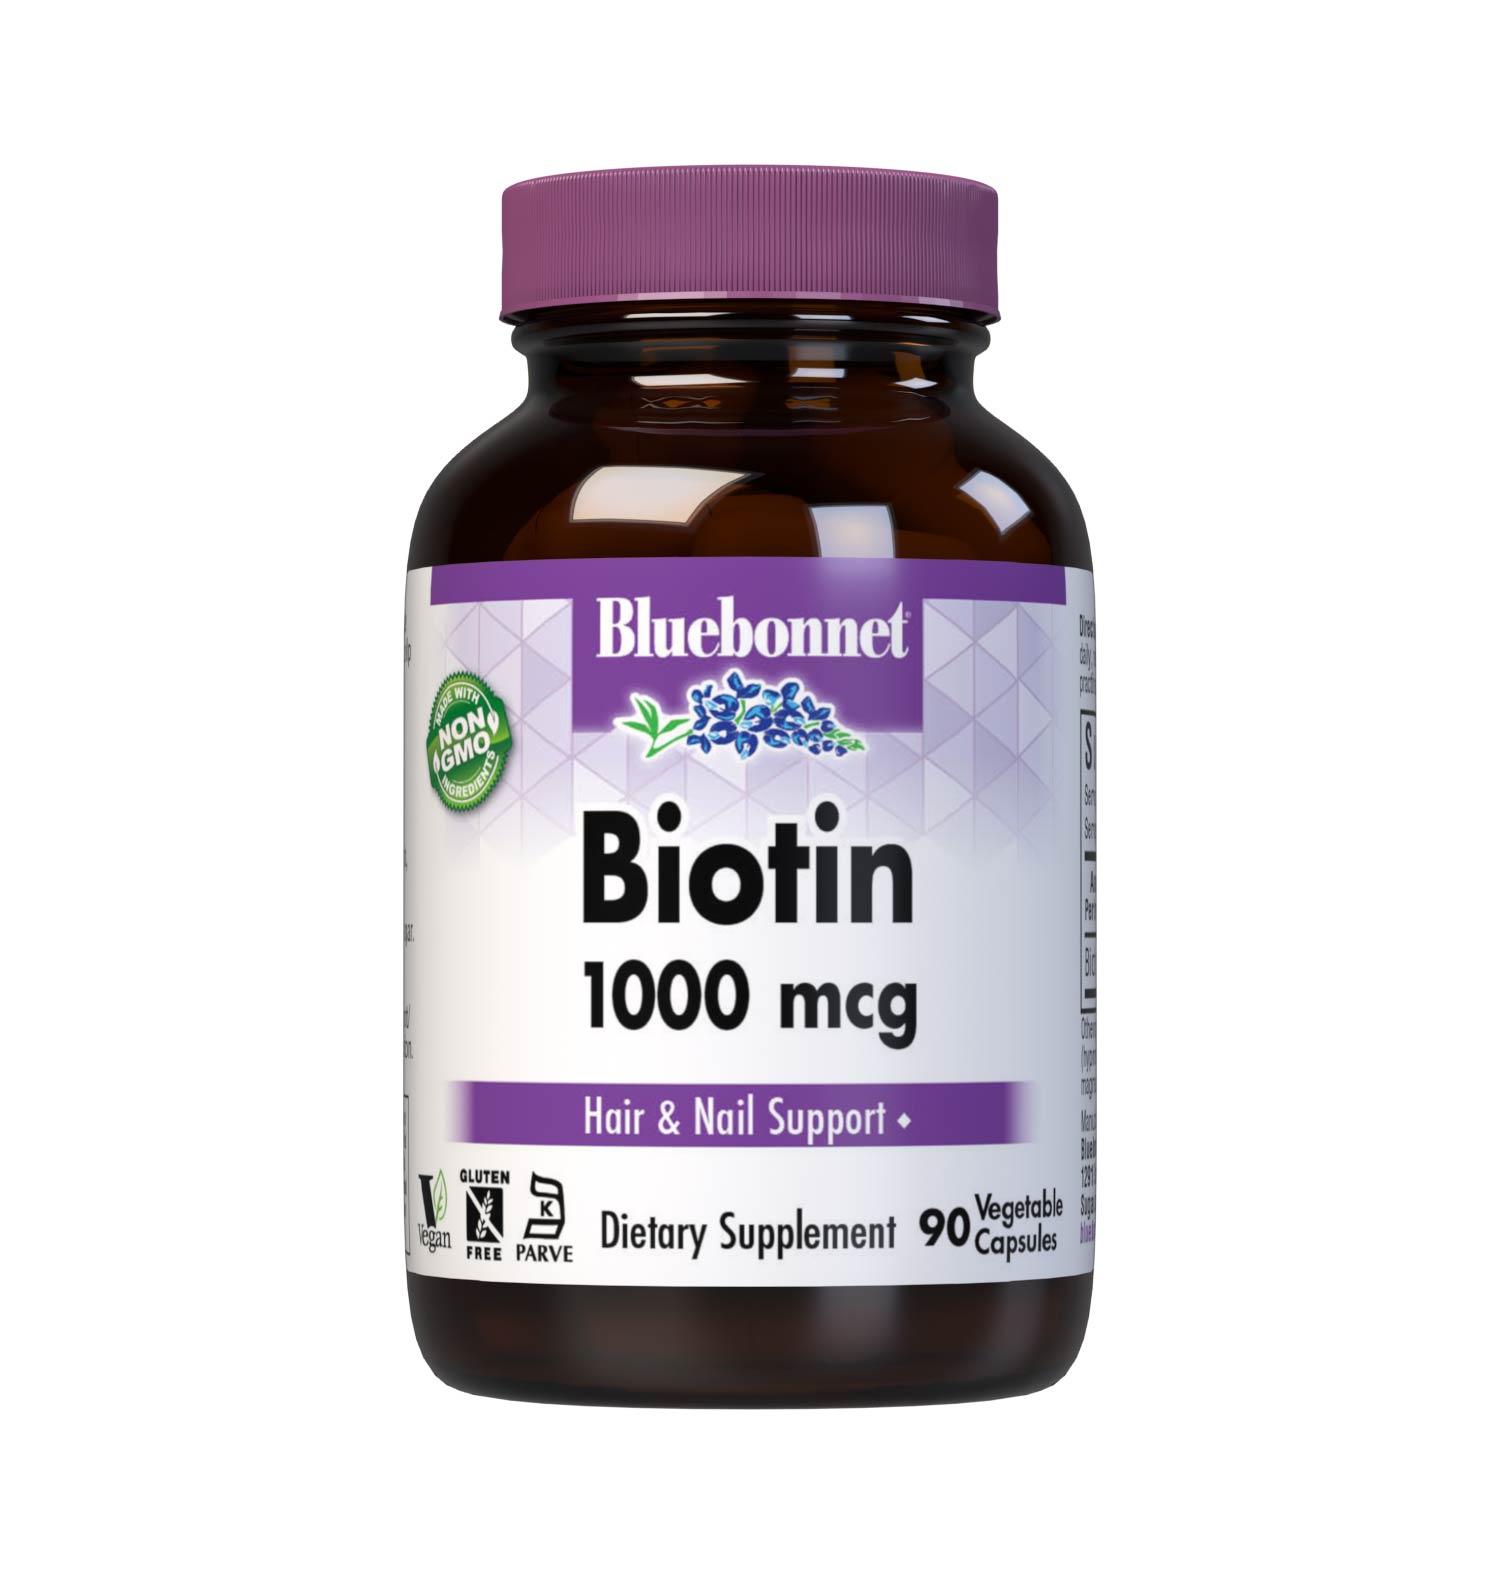 Bluebonnet’s Biotin 1000 mcg Capsules are formulated with yeast-free biotin in its crystalline form to support healthy hair and strong, durable nails. #size_90 count